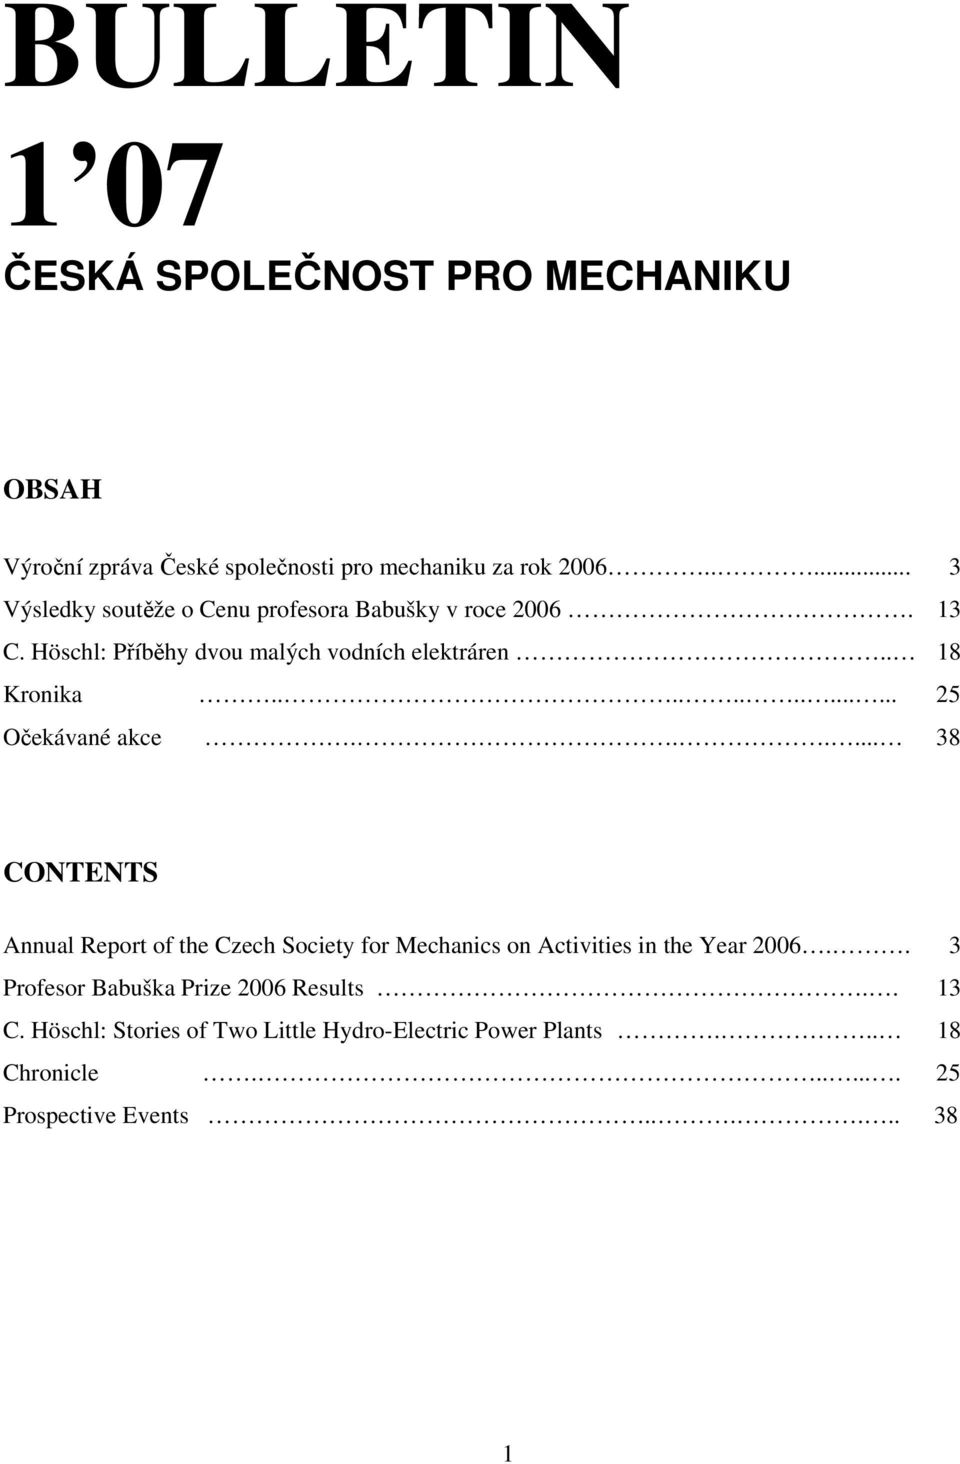 ............. 25 Očekávané akce...... 38 CONTENTS Annual Report of the Czech Society for Mechanics on Activities in the Year 2006.